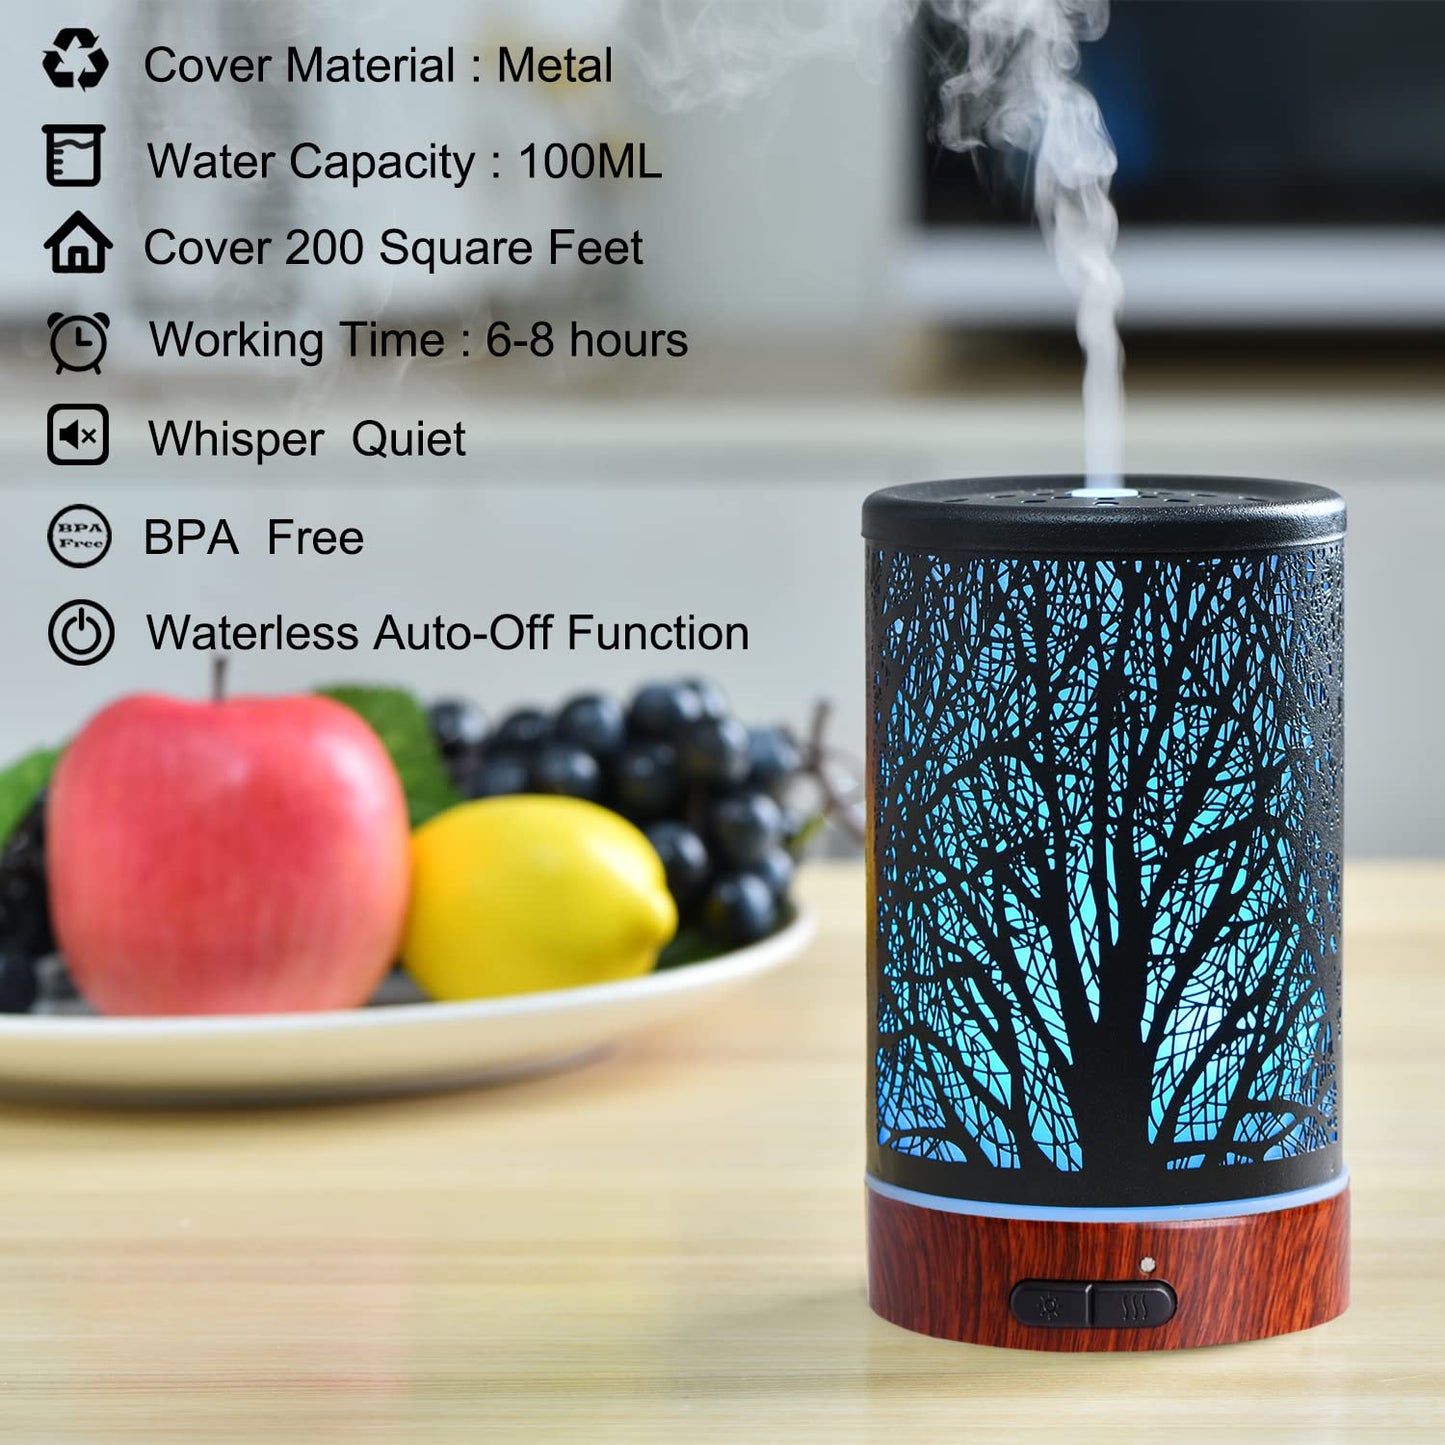 Metal Essential Oils Diffuser 150ML Aromatherapy Diffuser Cool Mist Humidifier with 7 Colors Lights Waterless Auto Off Air Diffusers as Gifts for Moms Women Girls (Bigfoot)